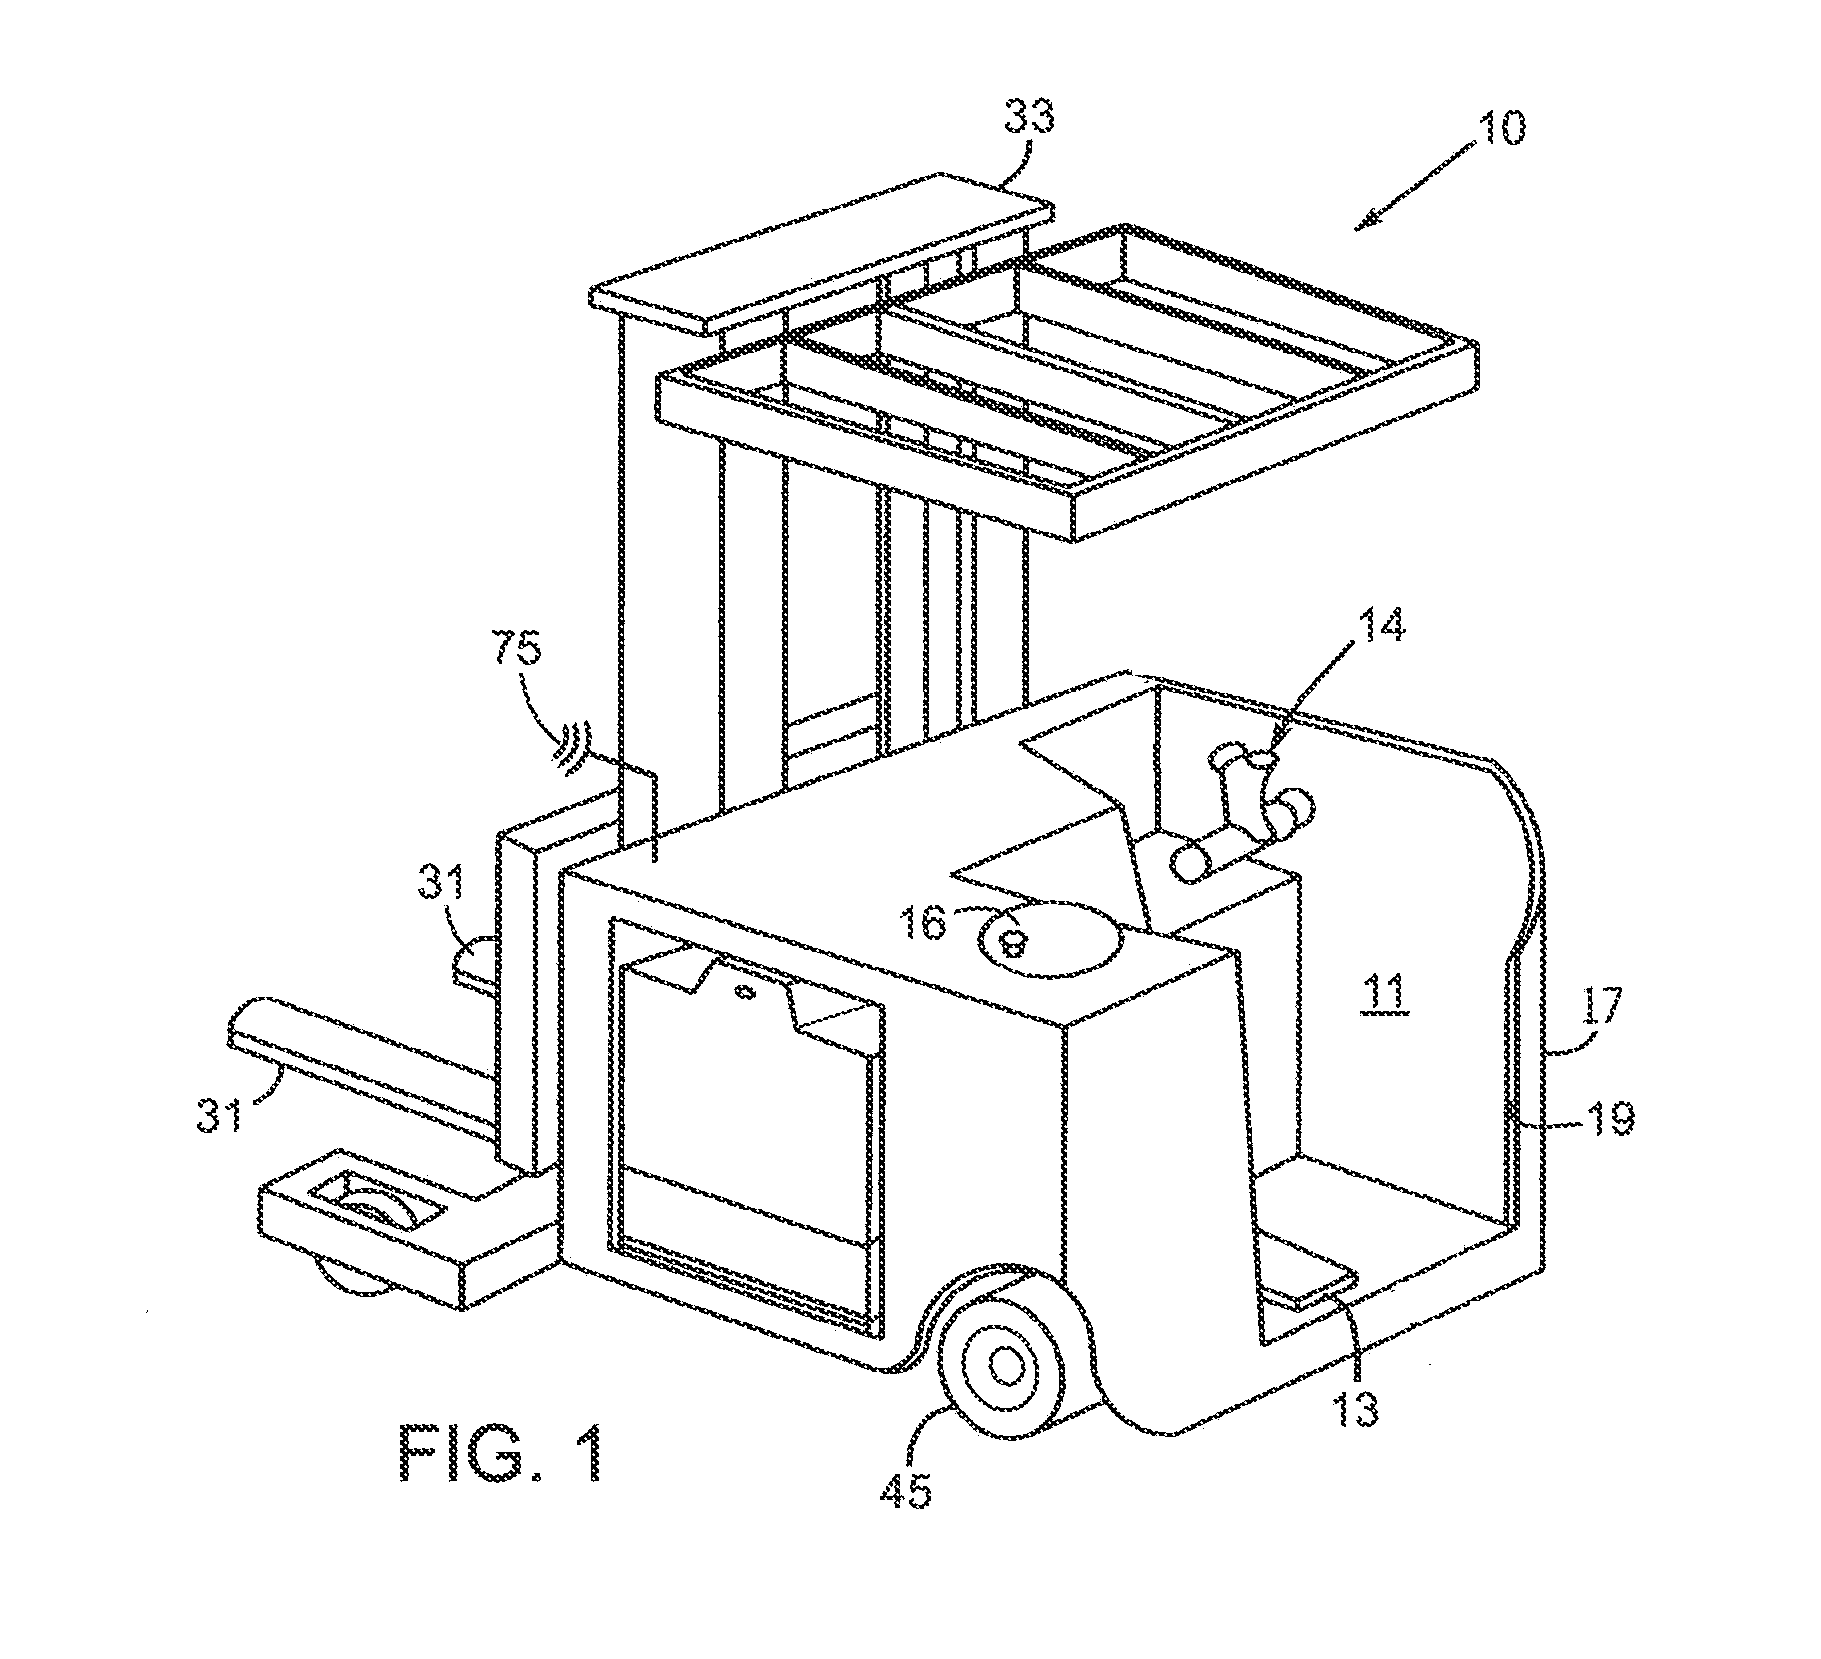 System for accessing information for maintaining and repairing industrial vehicles